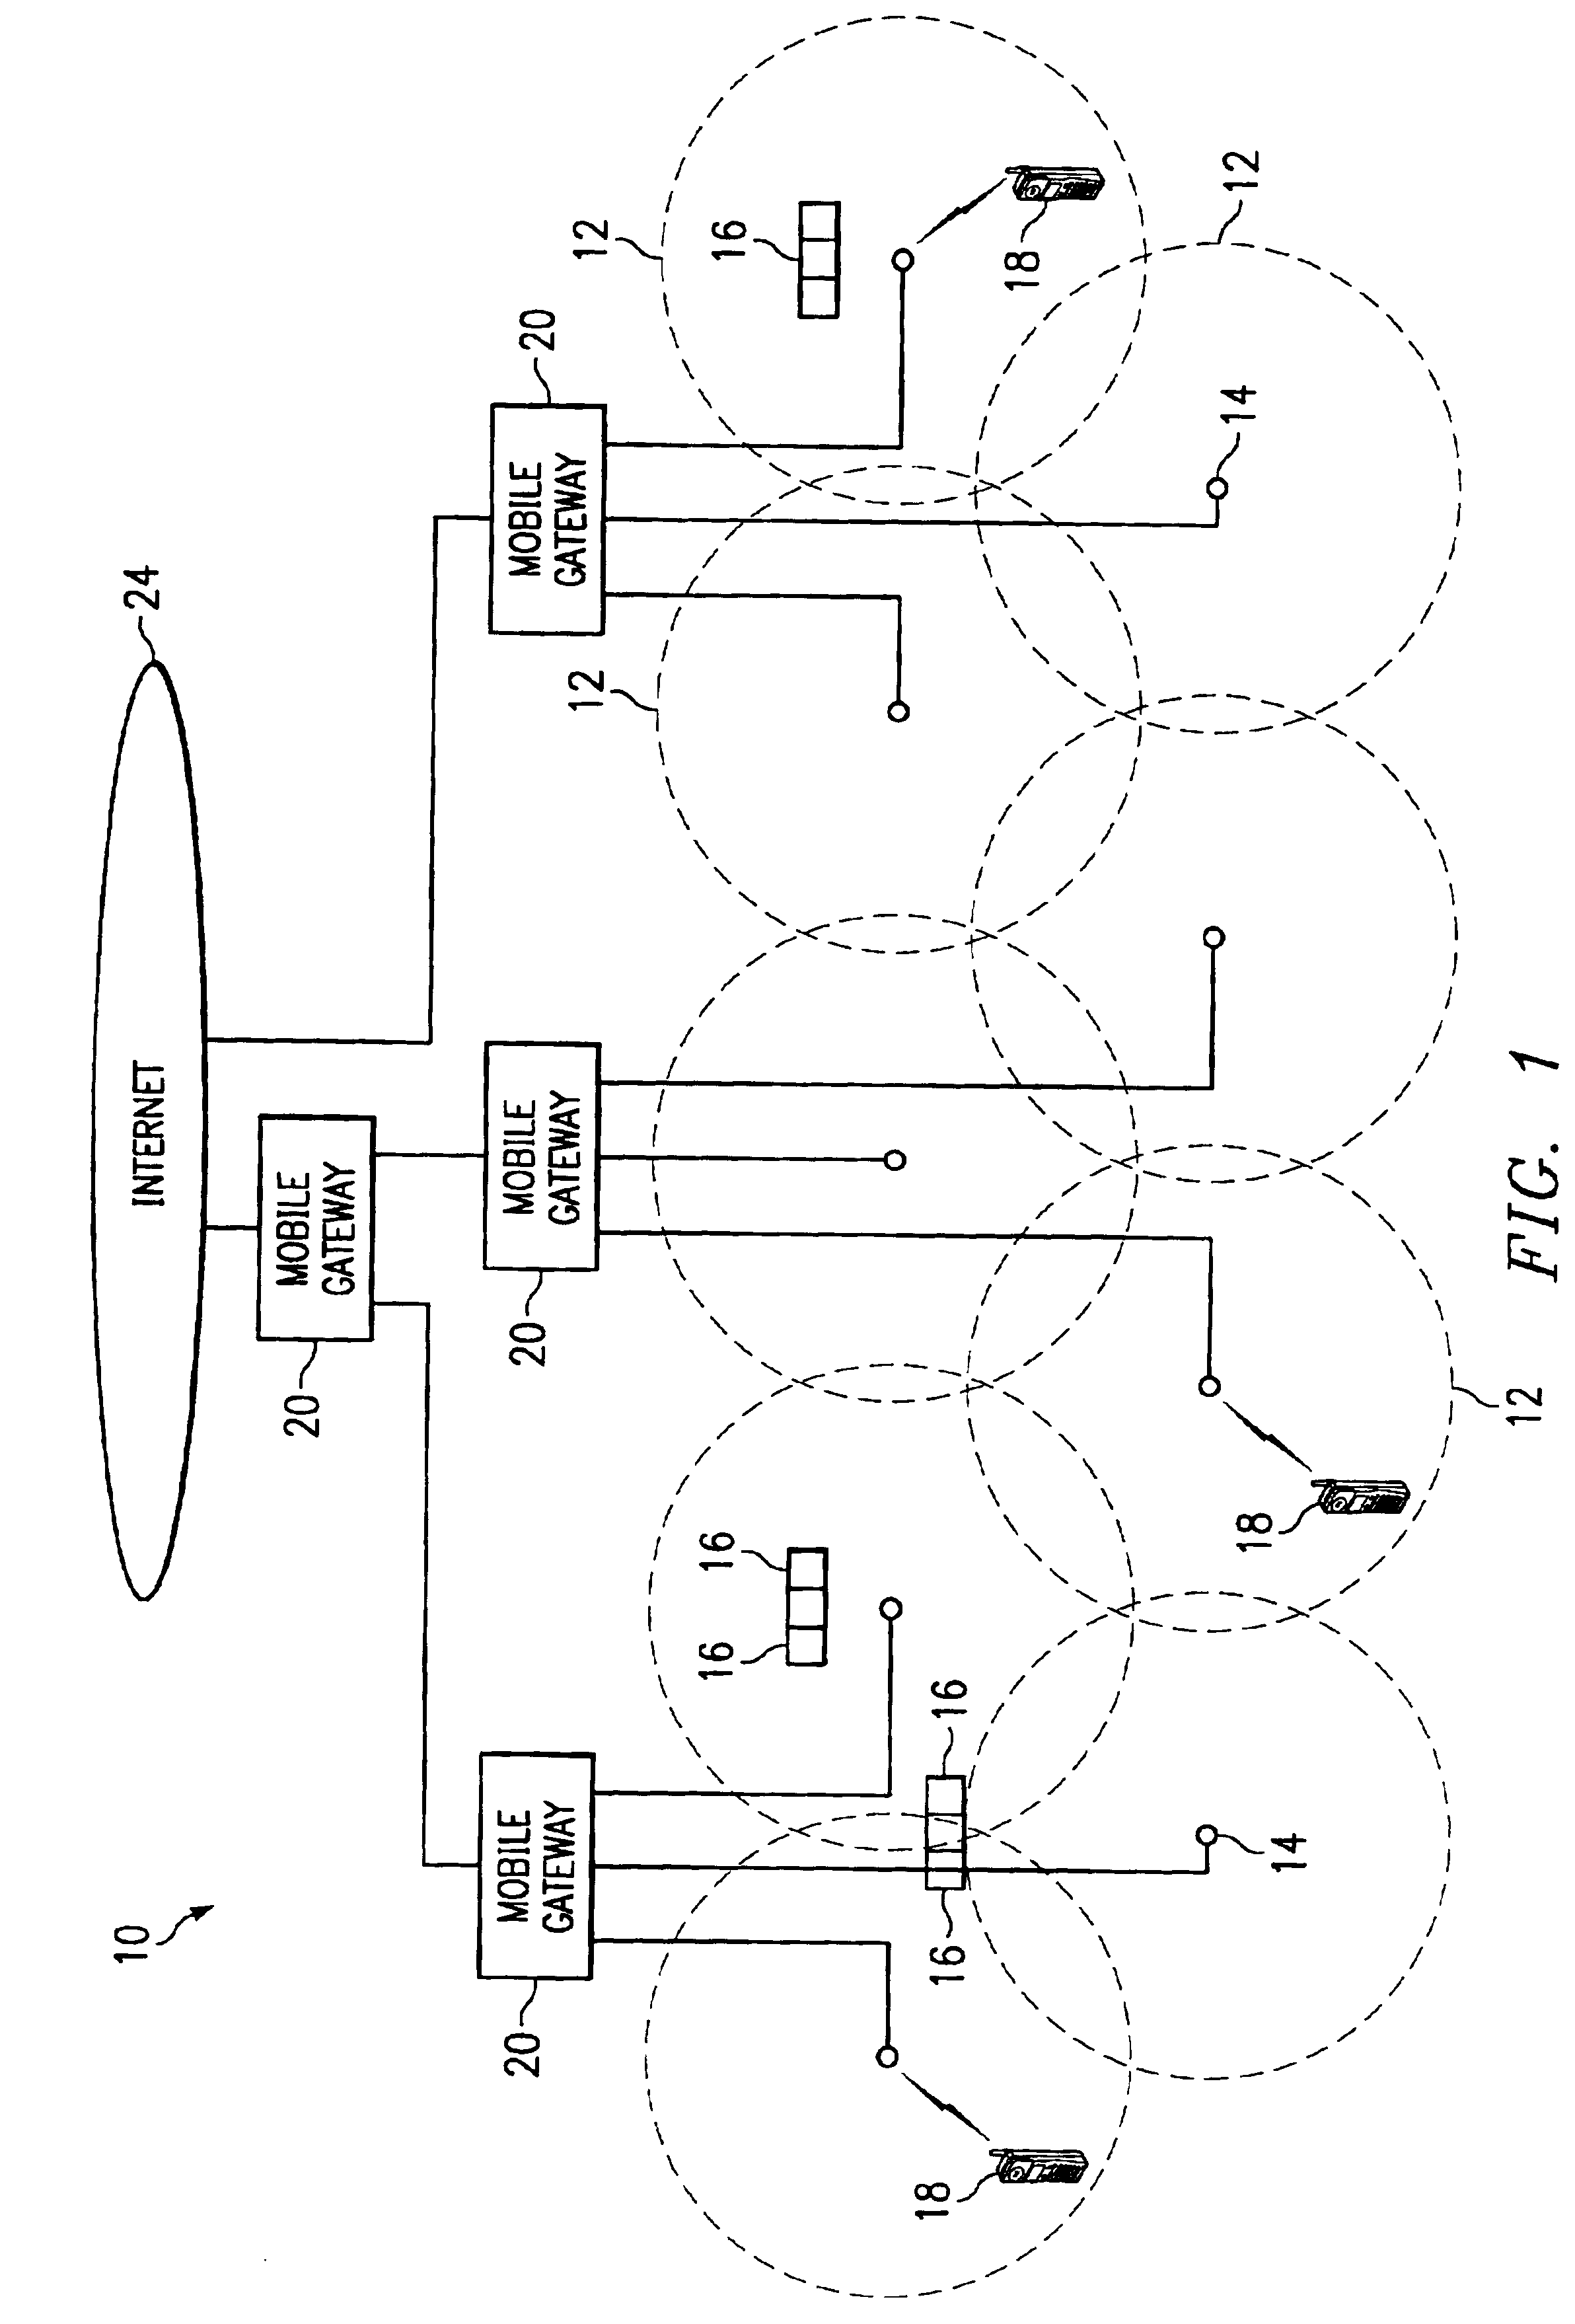 Method and system for queuing traffic in a wireless communications network